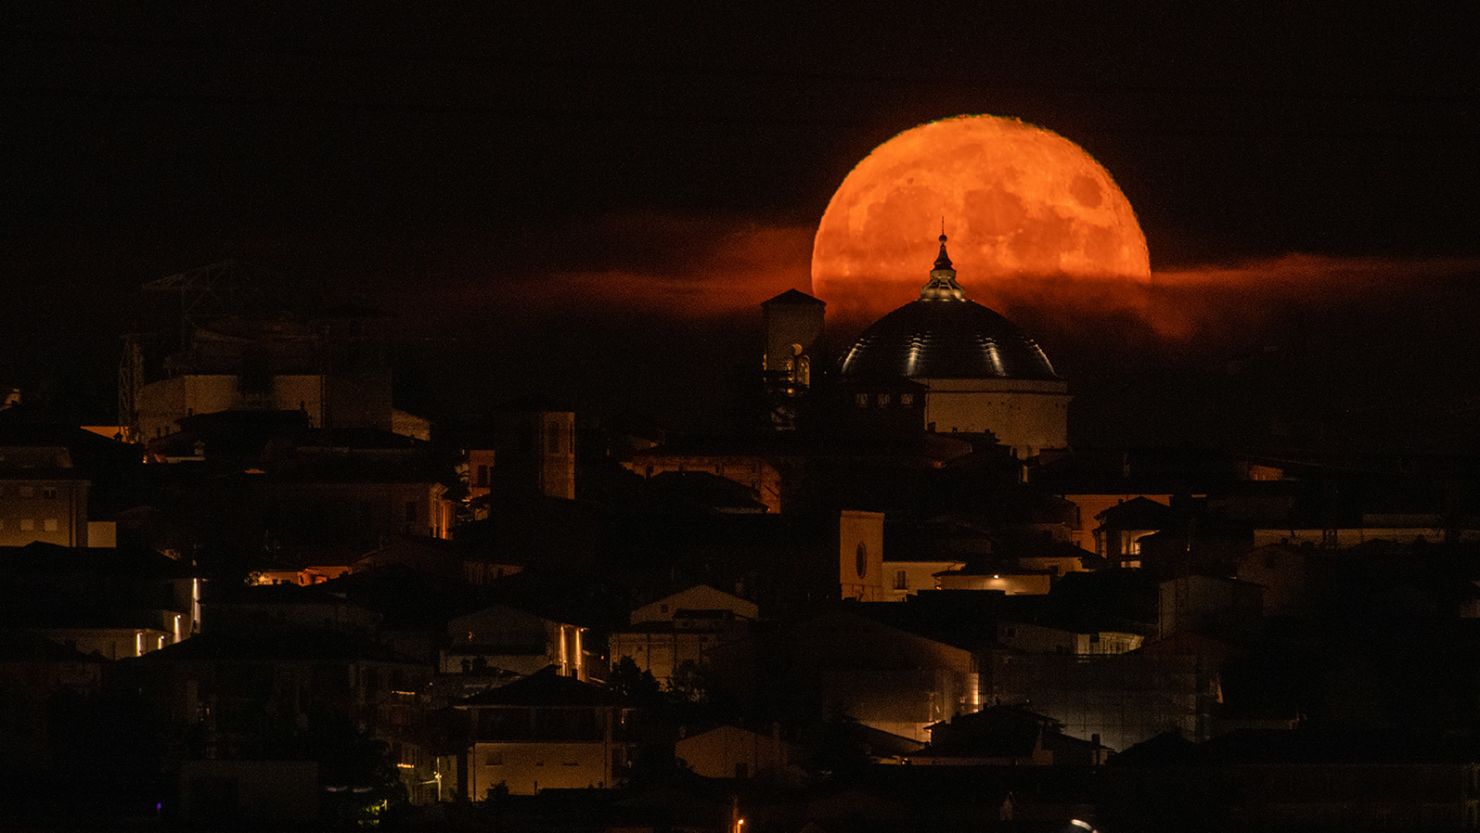 A sturgeon Super Moon rising behind San Bernardino church dome in L'Aquila (Abruzzo, Italy), on august 12, 2022. August full moon is the last supermoon of  2022. (Photo by Lorenzo Di Cola/NurPhoto via Getty Images)